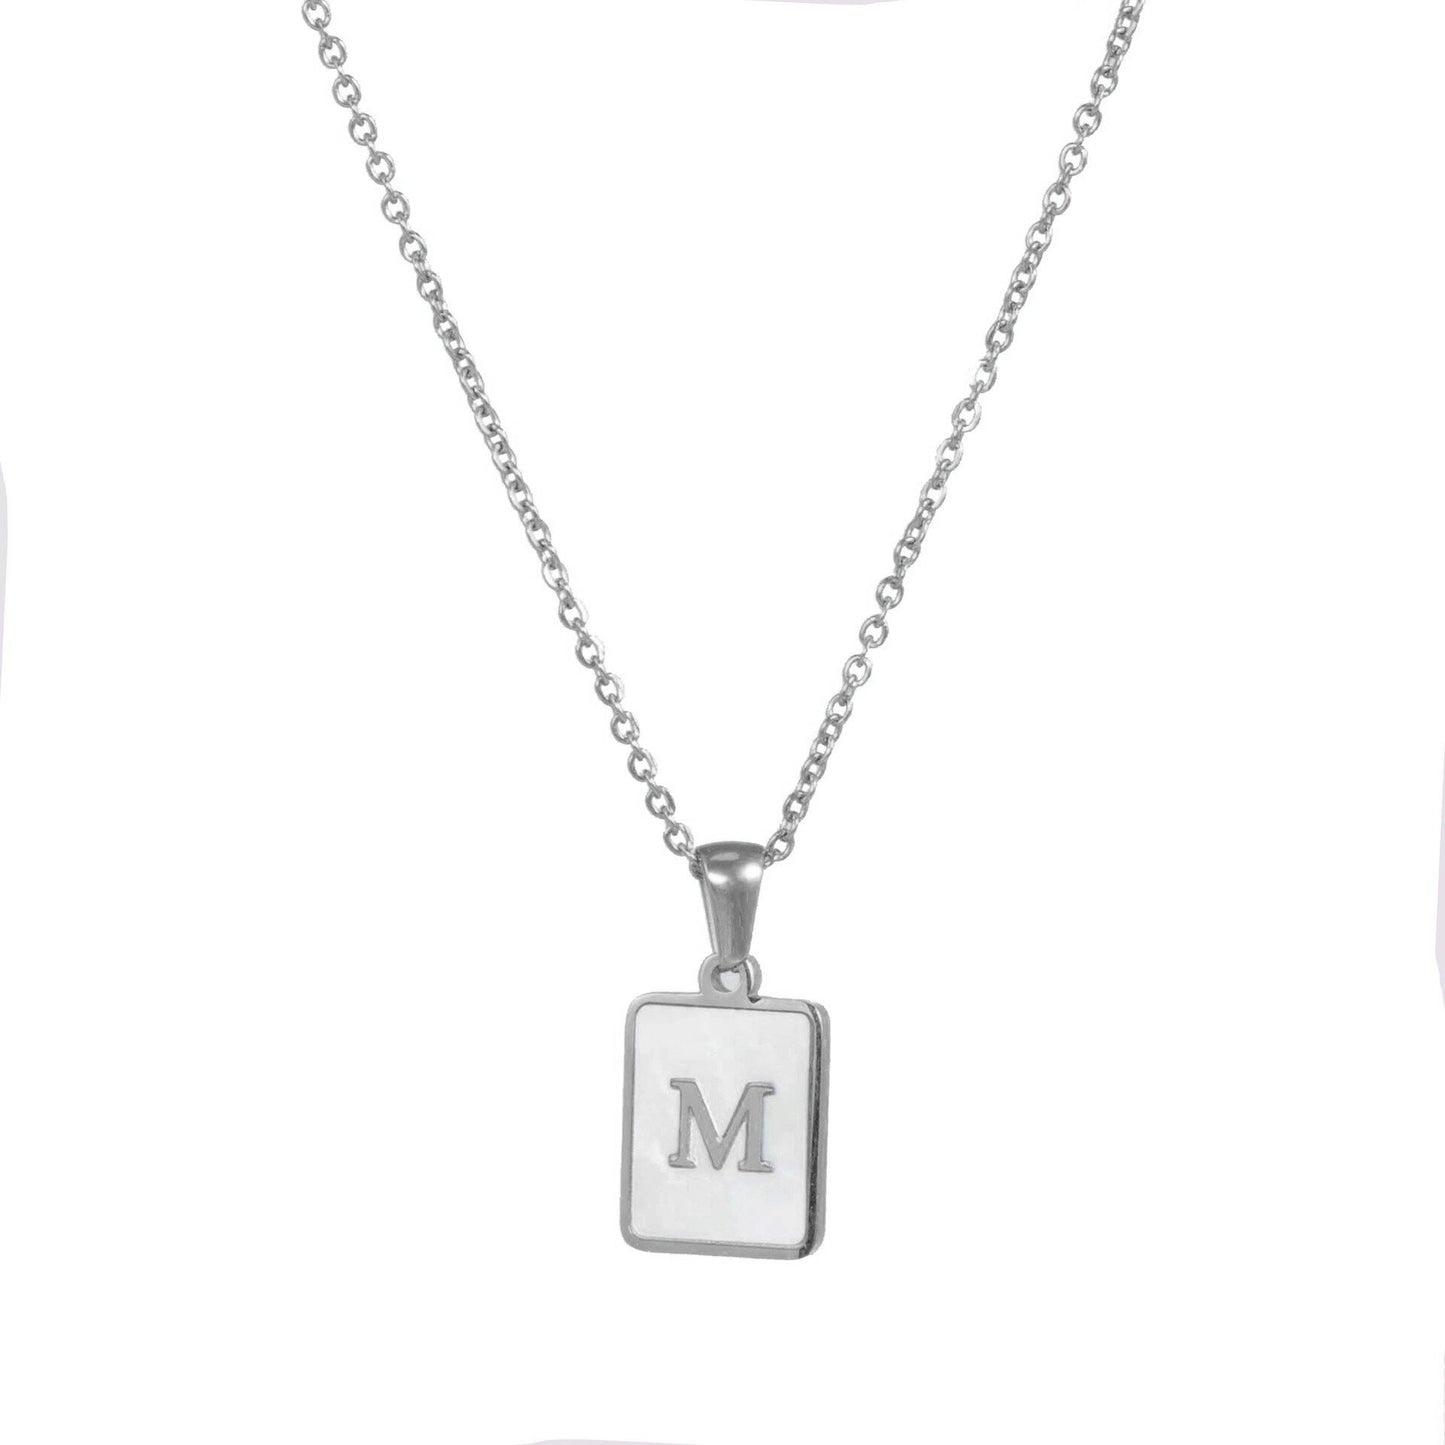 Silver Mother of Pearl Monogram Necklace, Letter M.